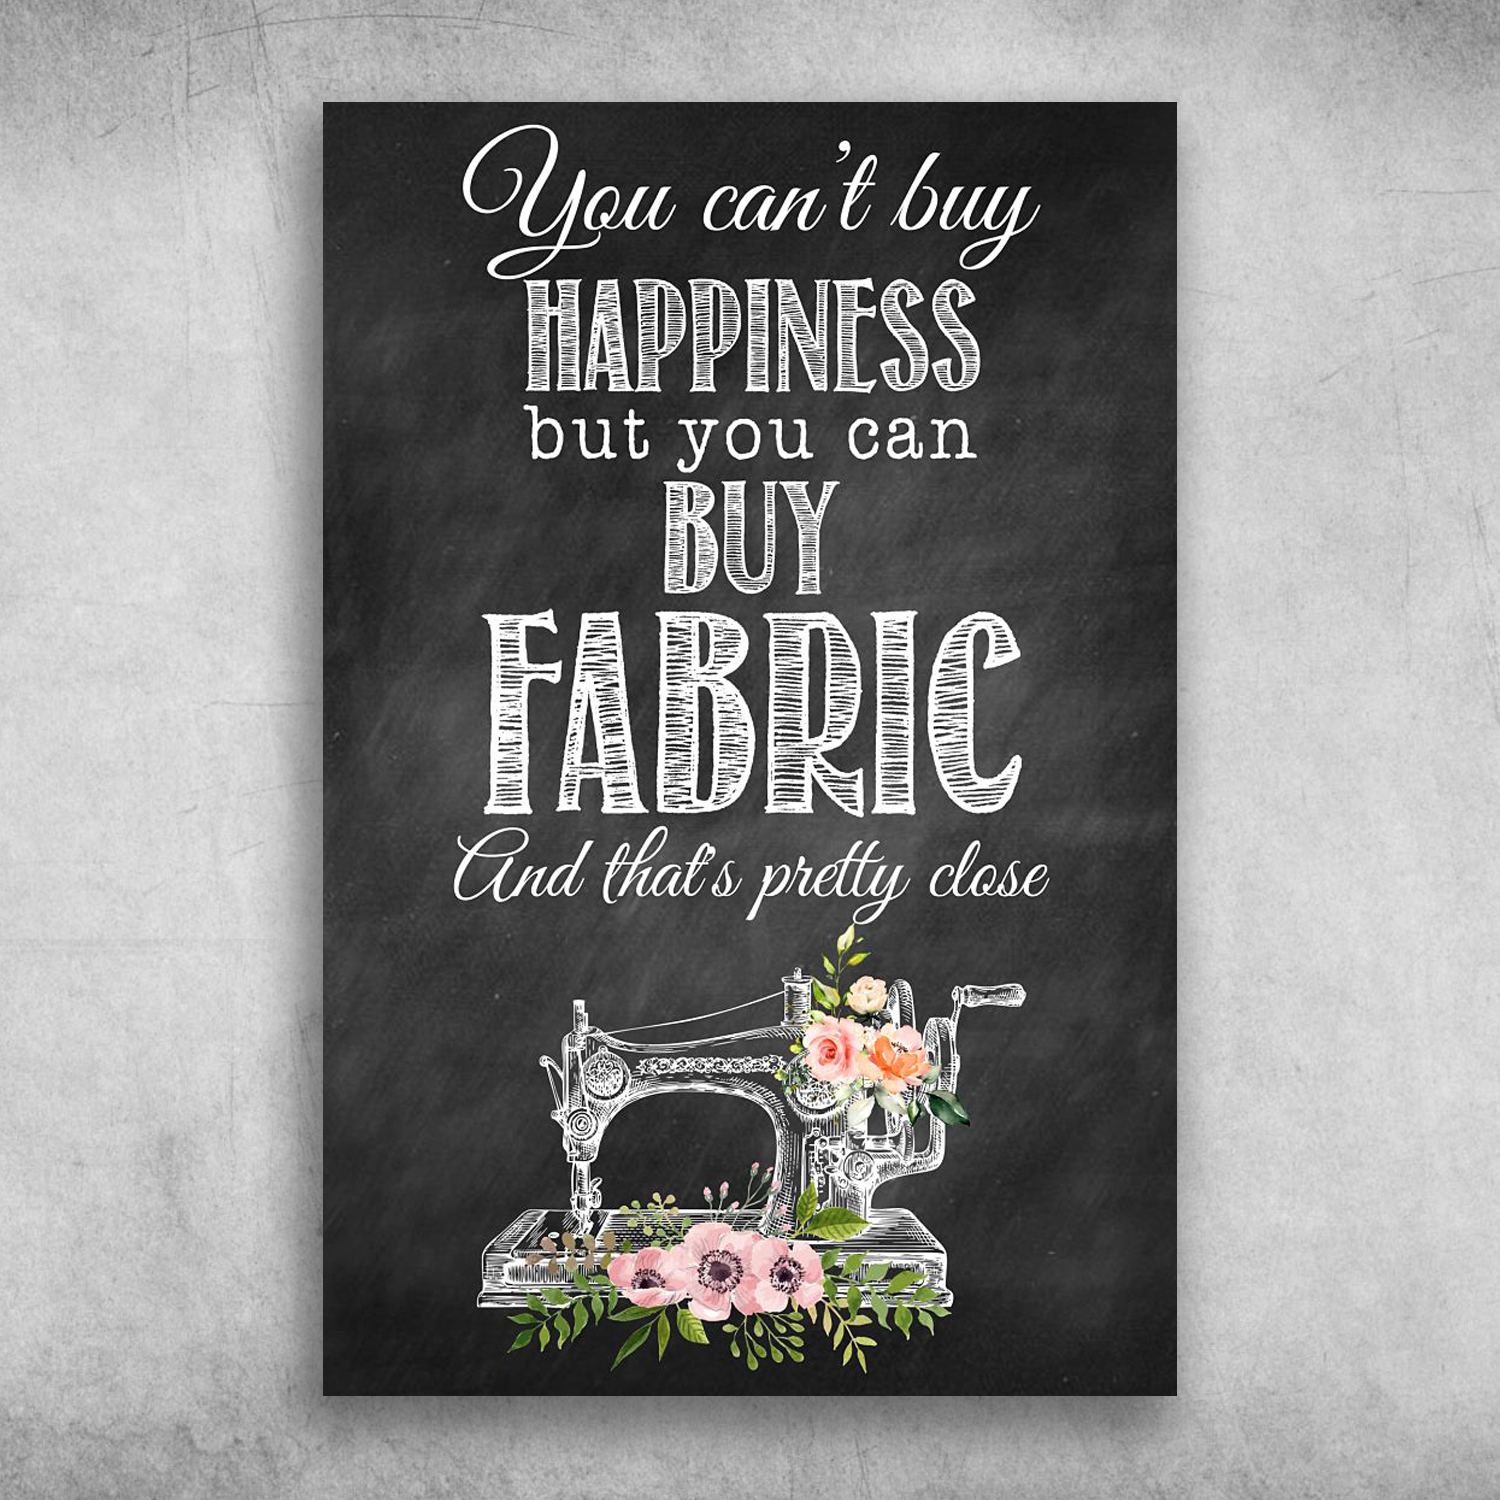 You Can't Buy Happiness But You Can Buy Fabric Sewing Machine